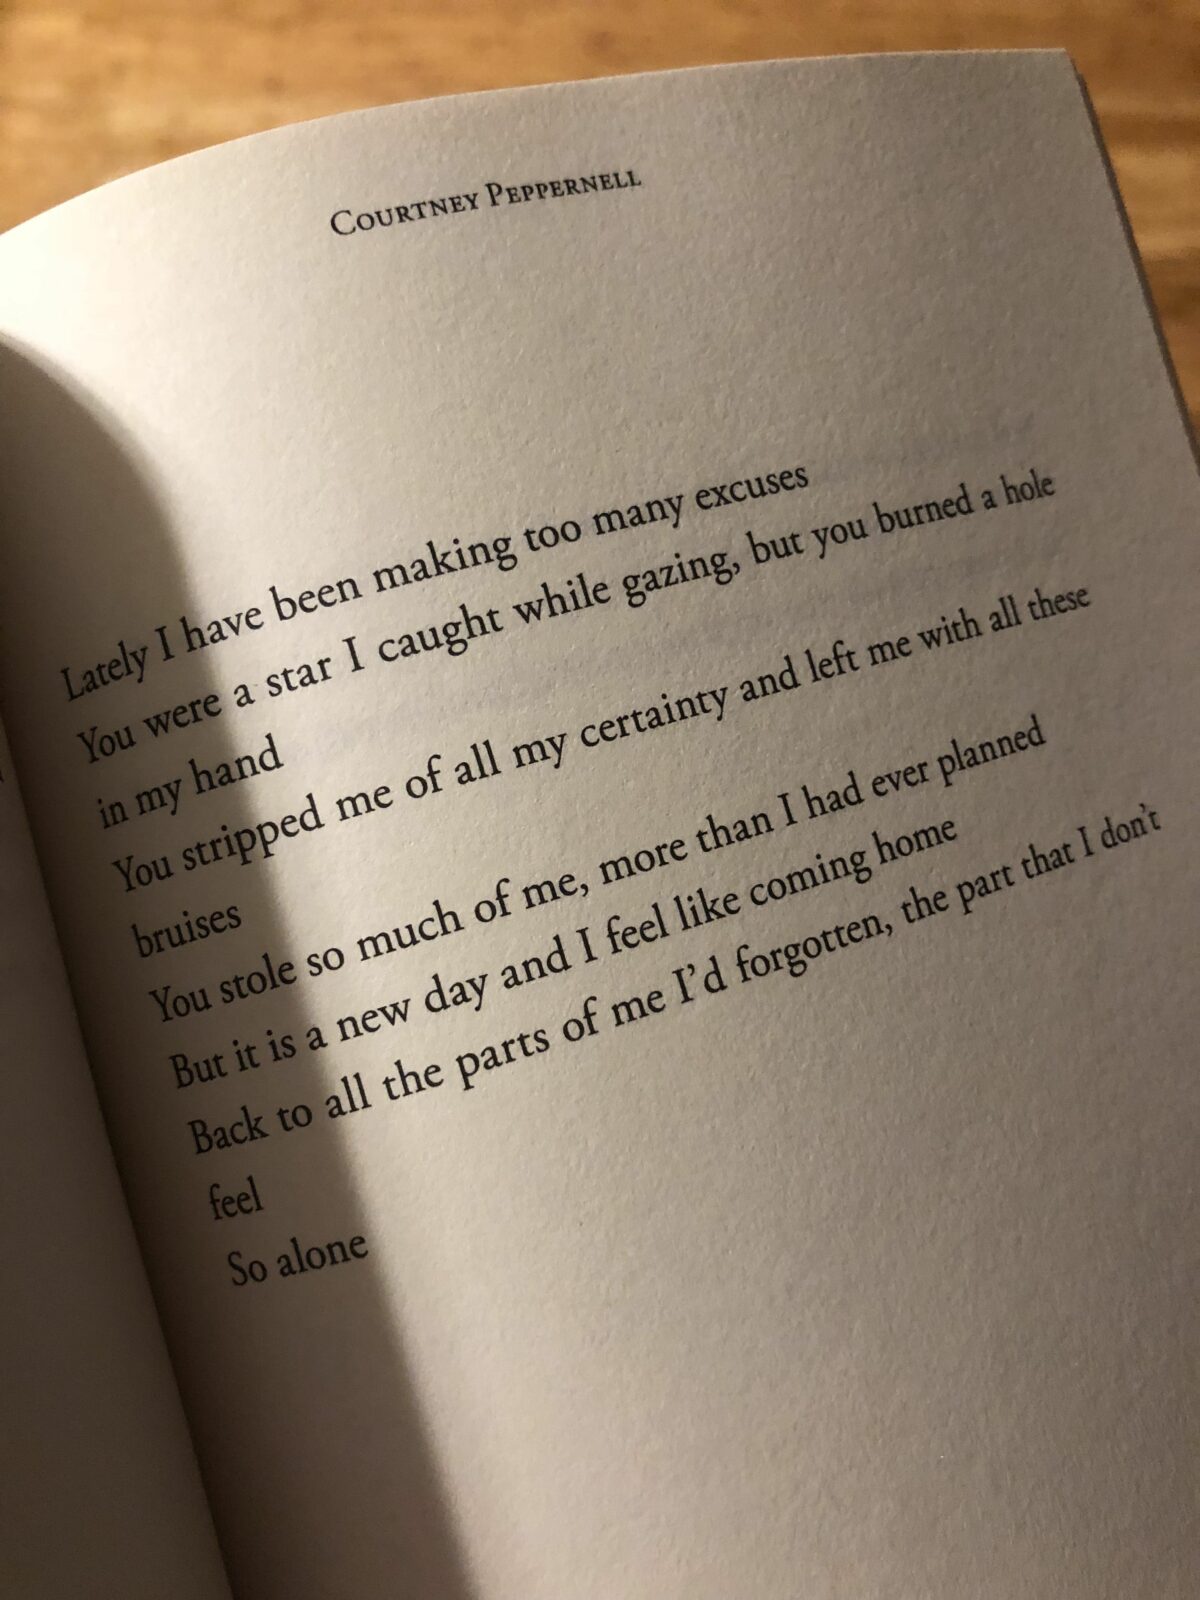 pillow thoughts courtney peppernell